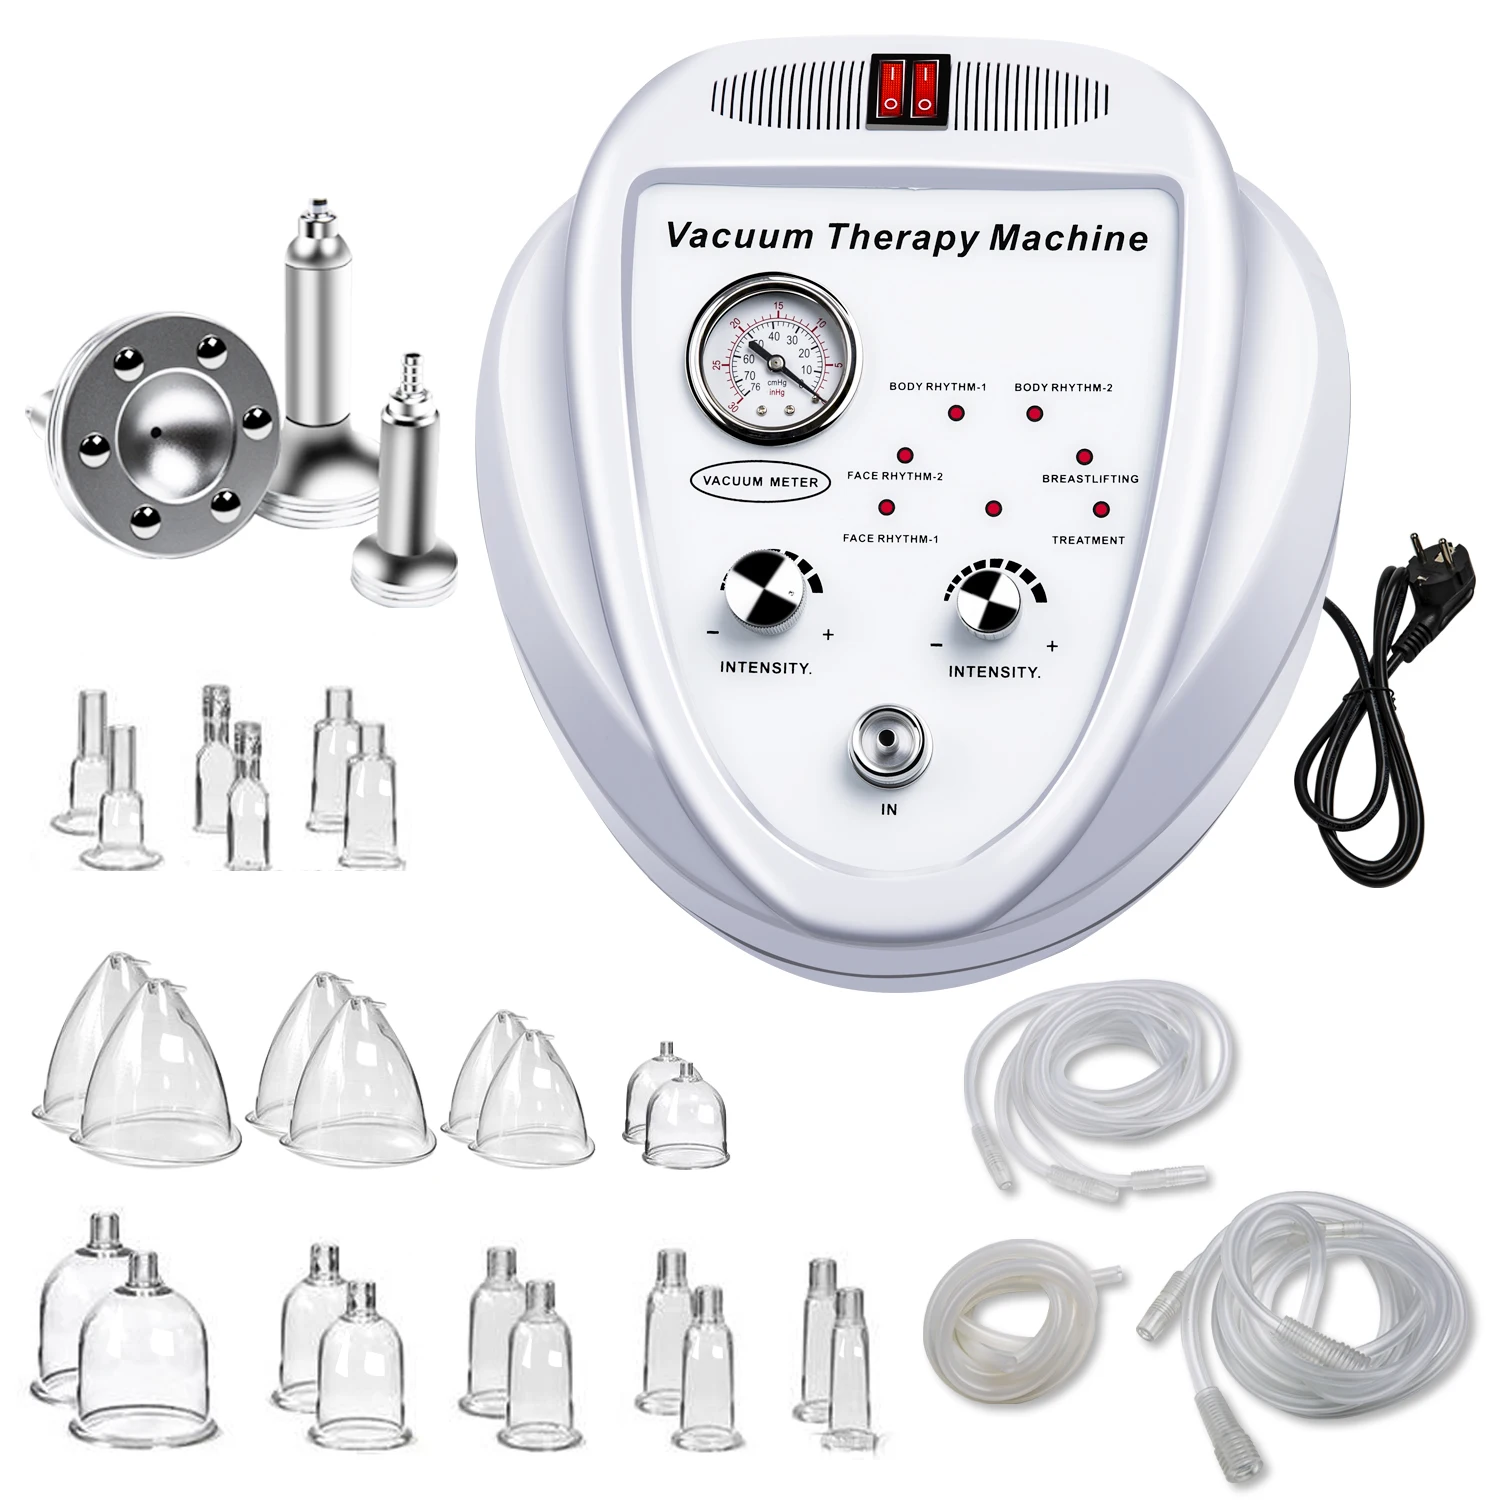 Eu tax free New design Vacuum Therapy Breast Massager Body Shaping Beauty Machine Bust Enhancer with CE VS600